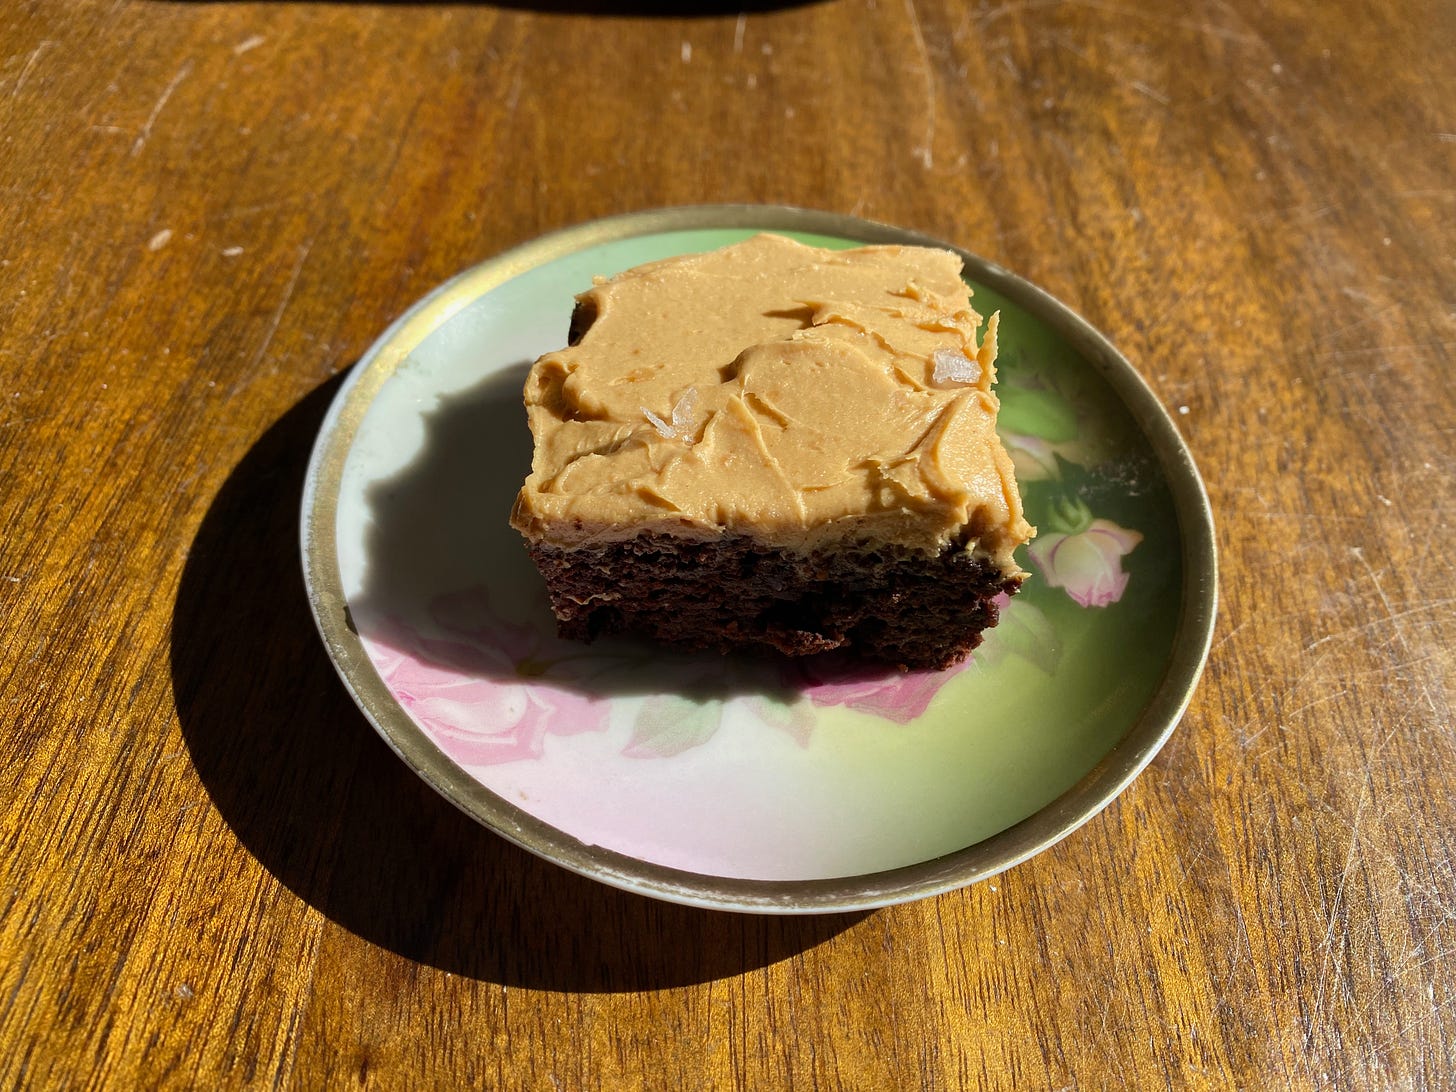 A brownie topped with peanut butter frosting and flecked with flaky salt sits on a small plate painted with roses on a wooden table.